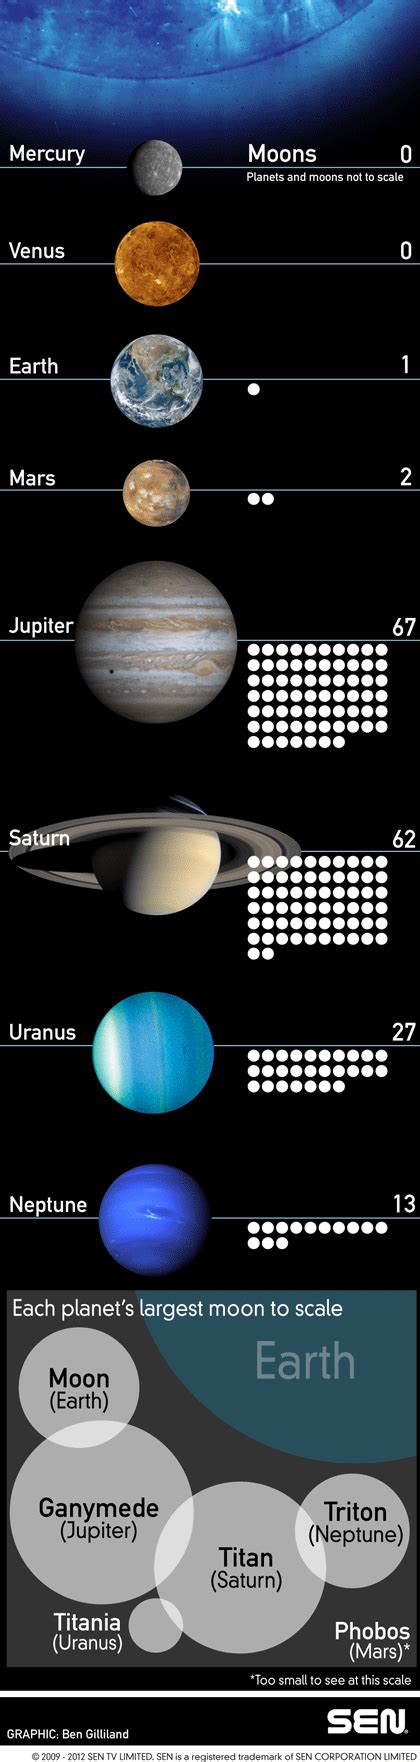 Moons And Planets Of The Solar System Space Science Earth Science